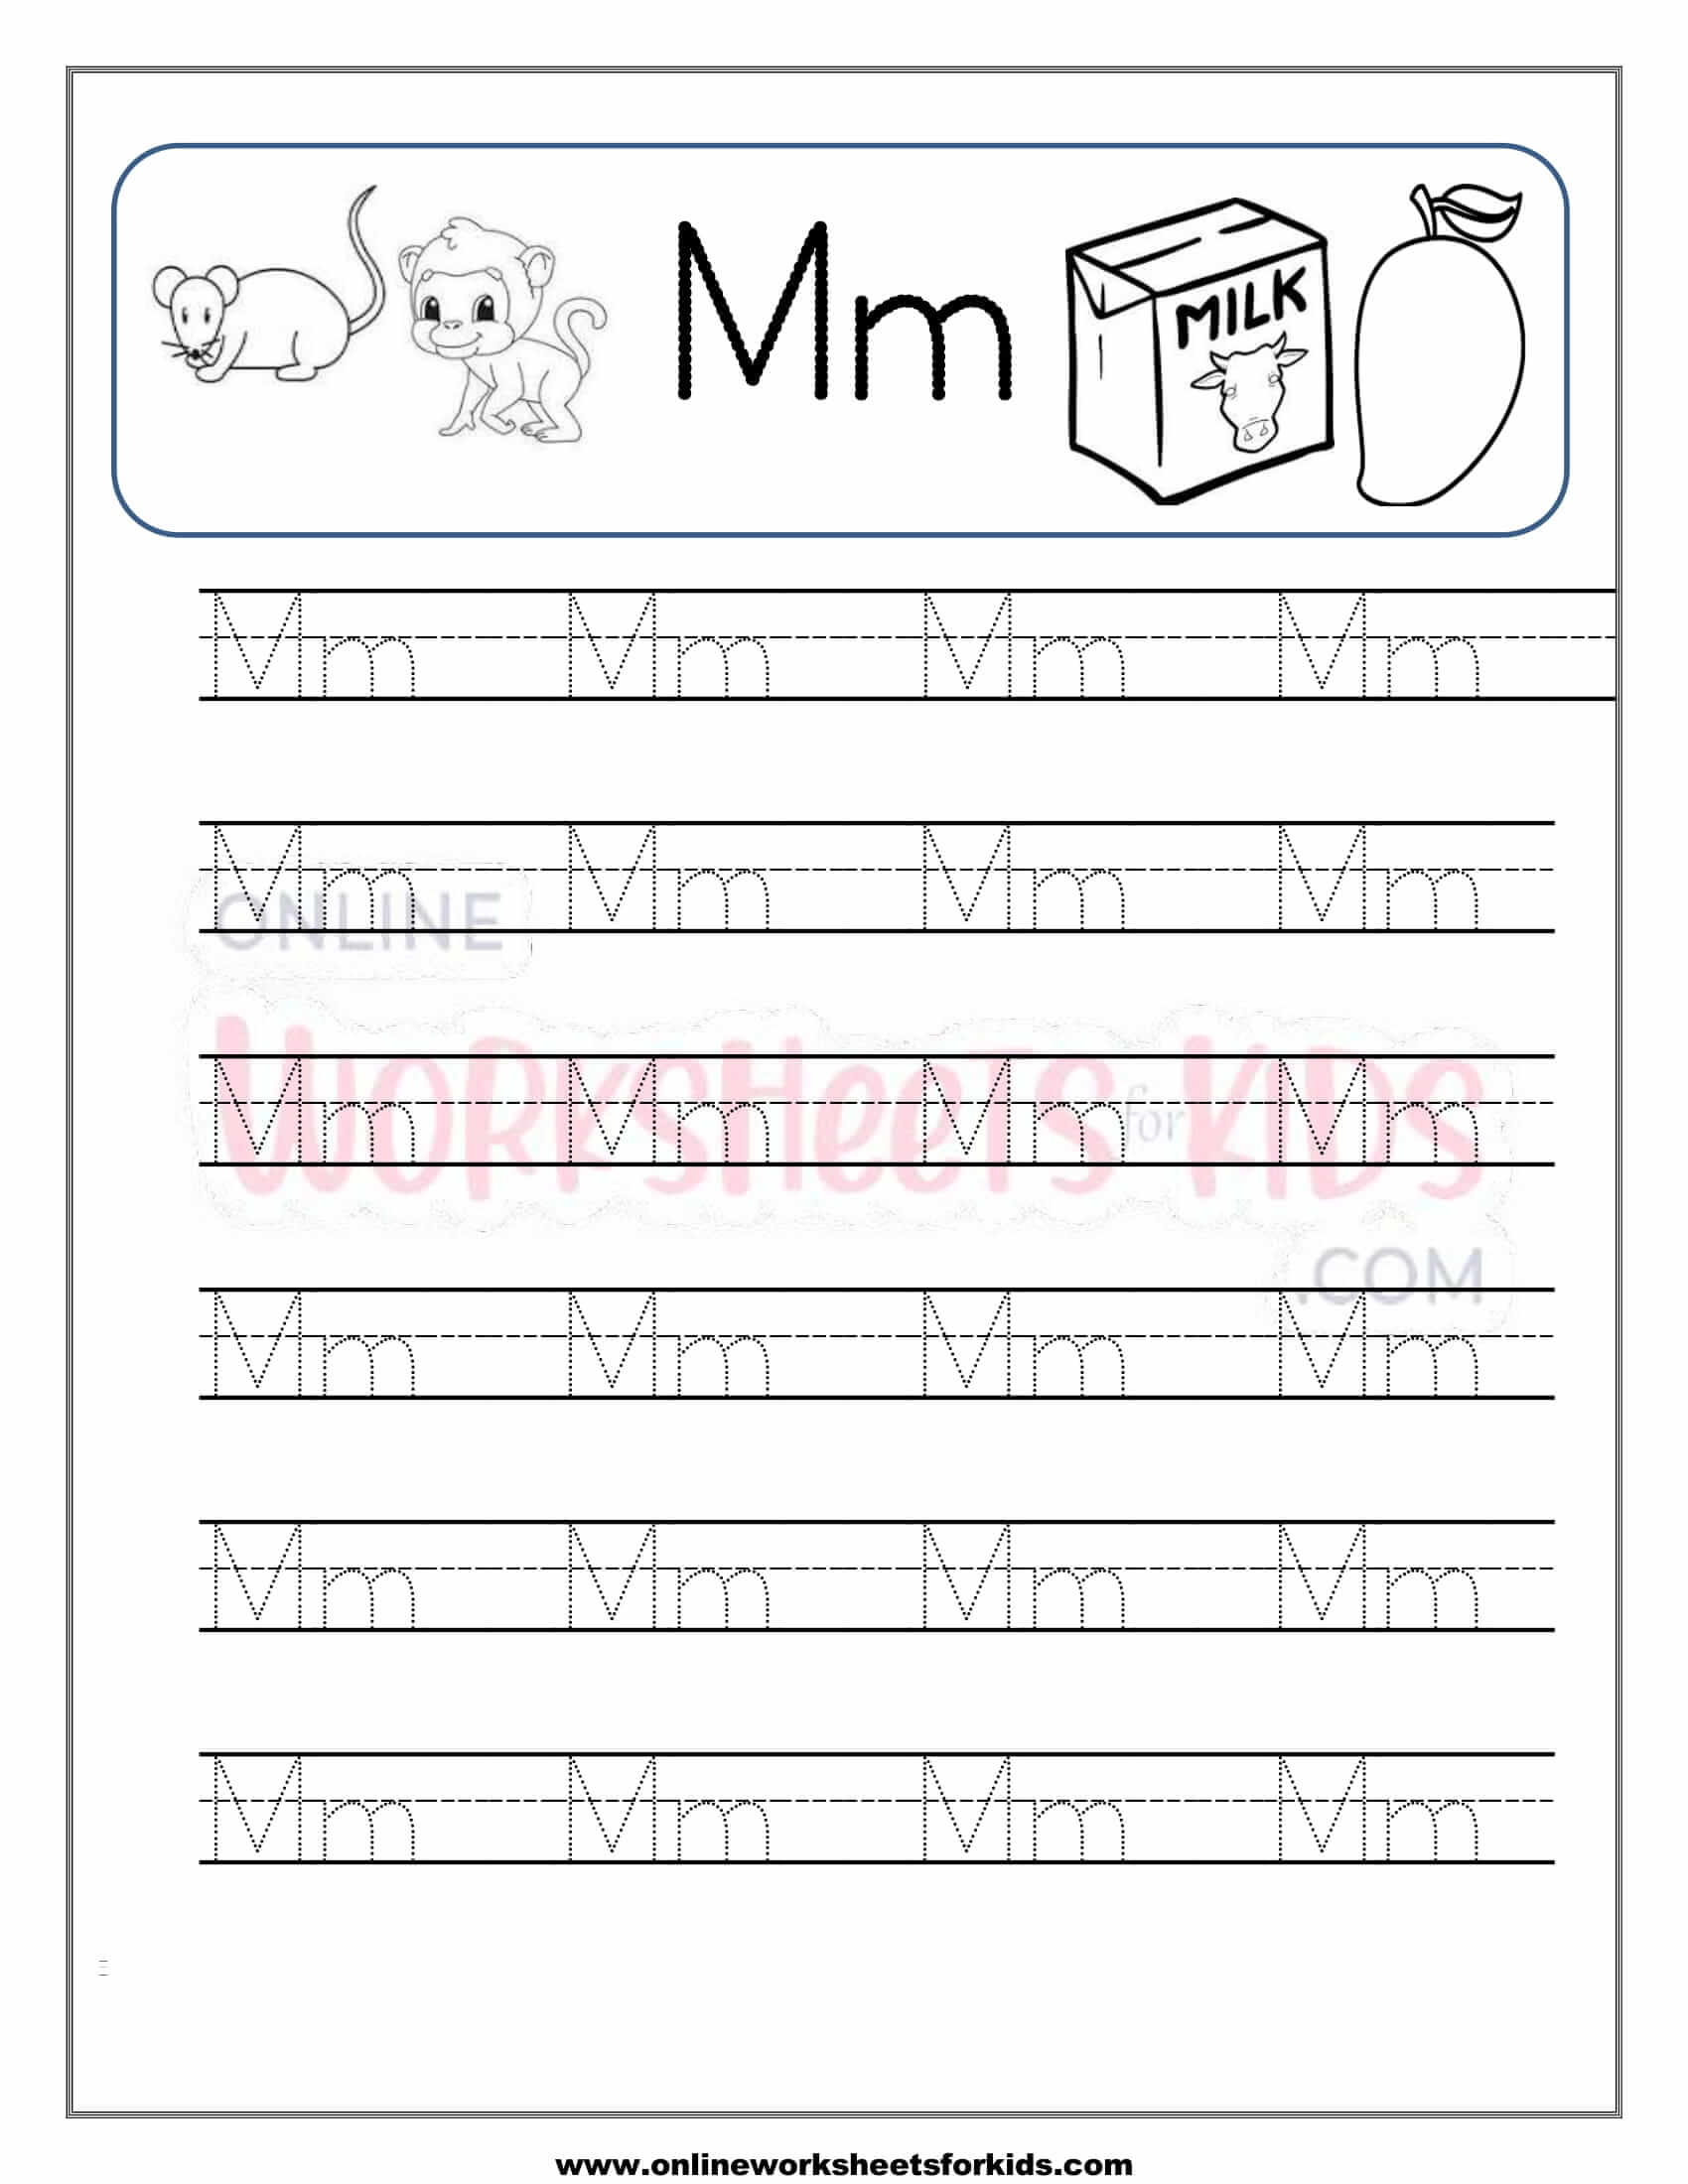 capital-and-small-letter-tracing-worksheet-13